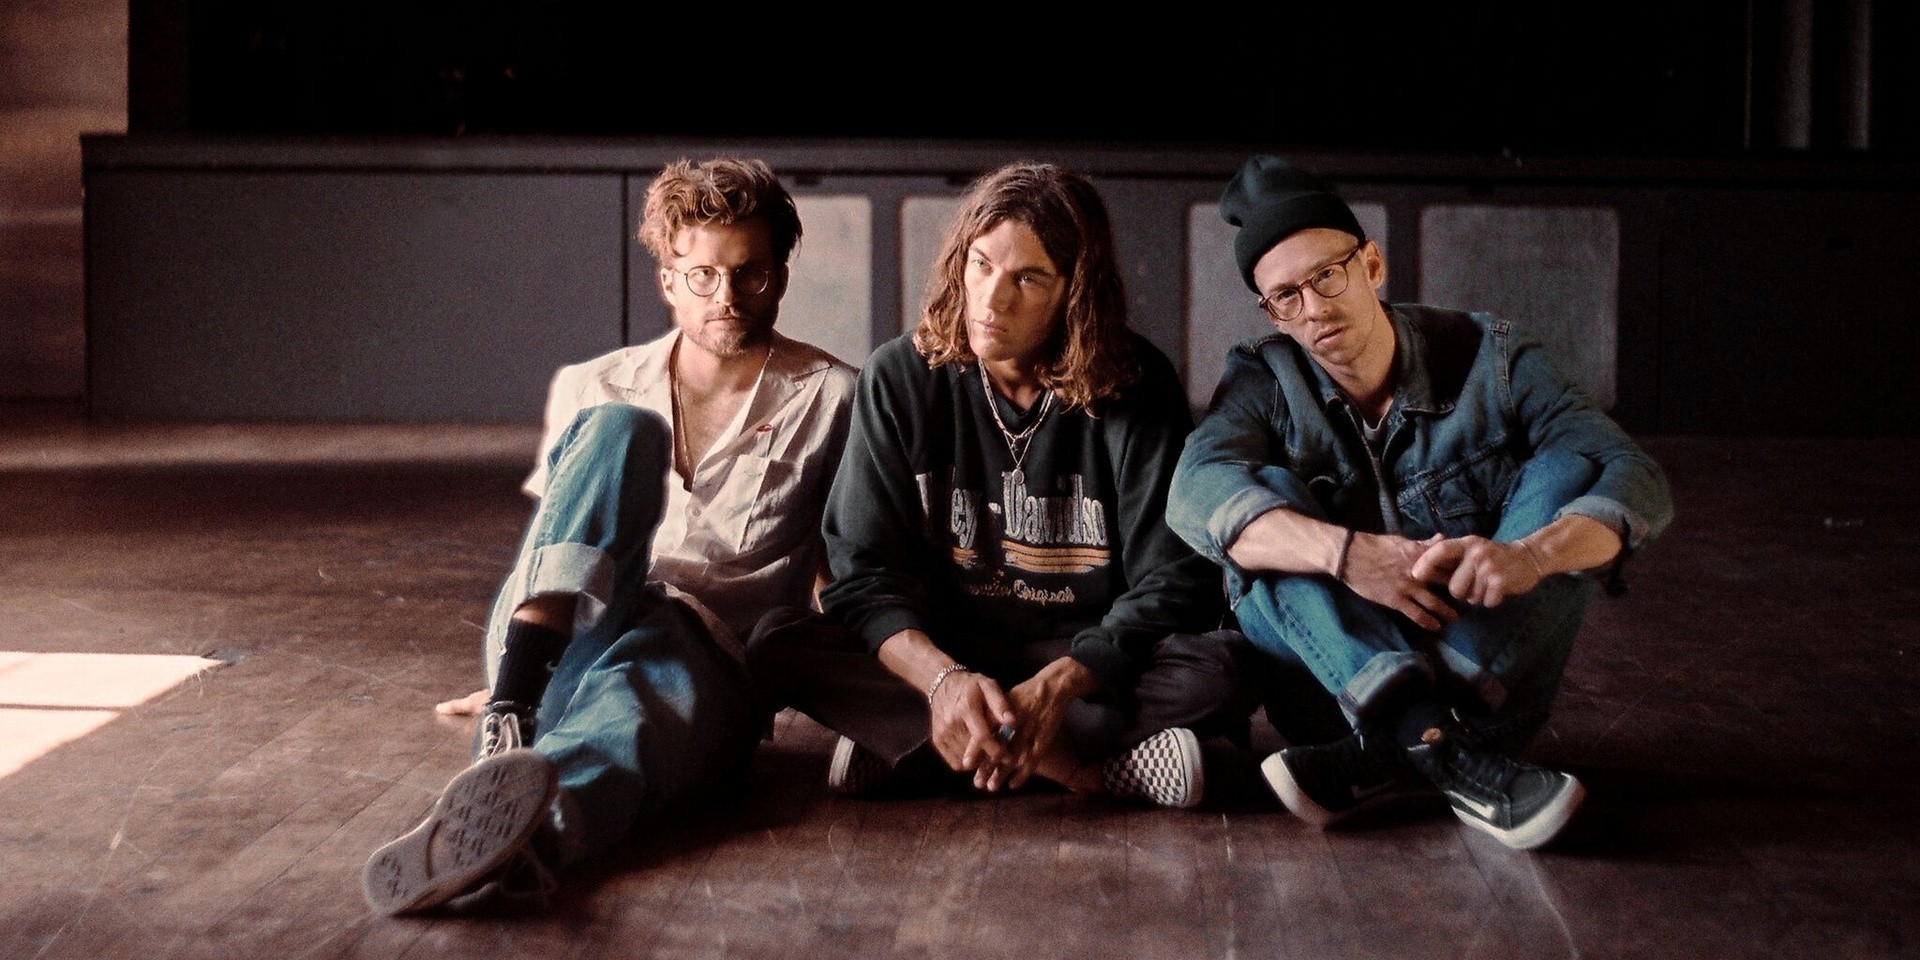 Rising indie pop trio LANY to perform in Singapore